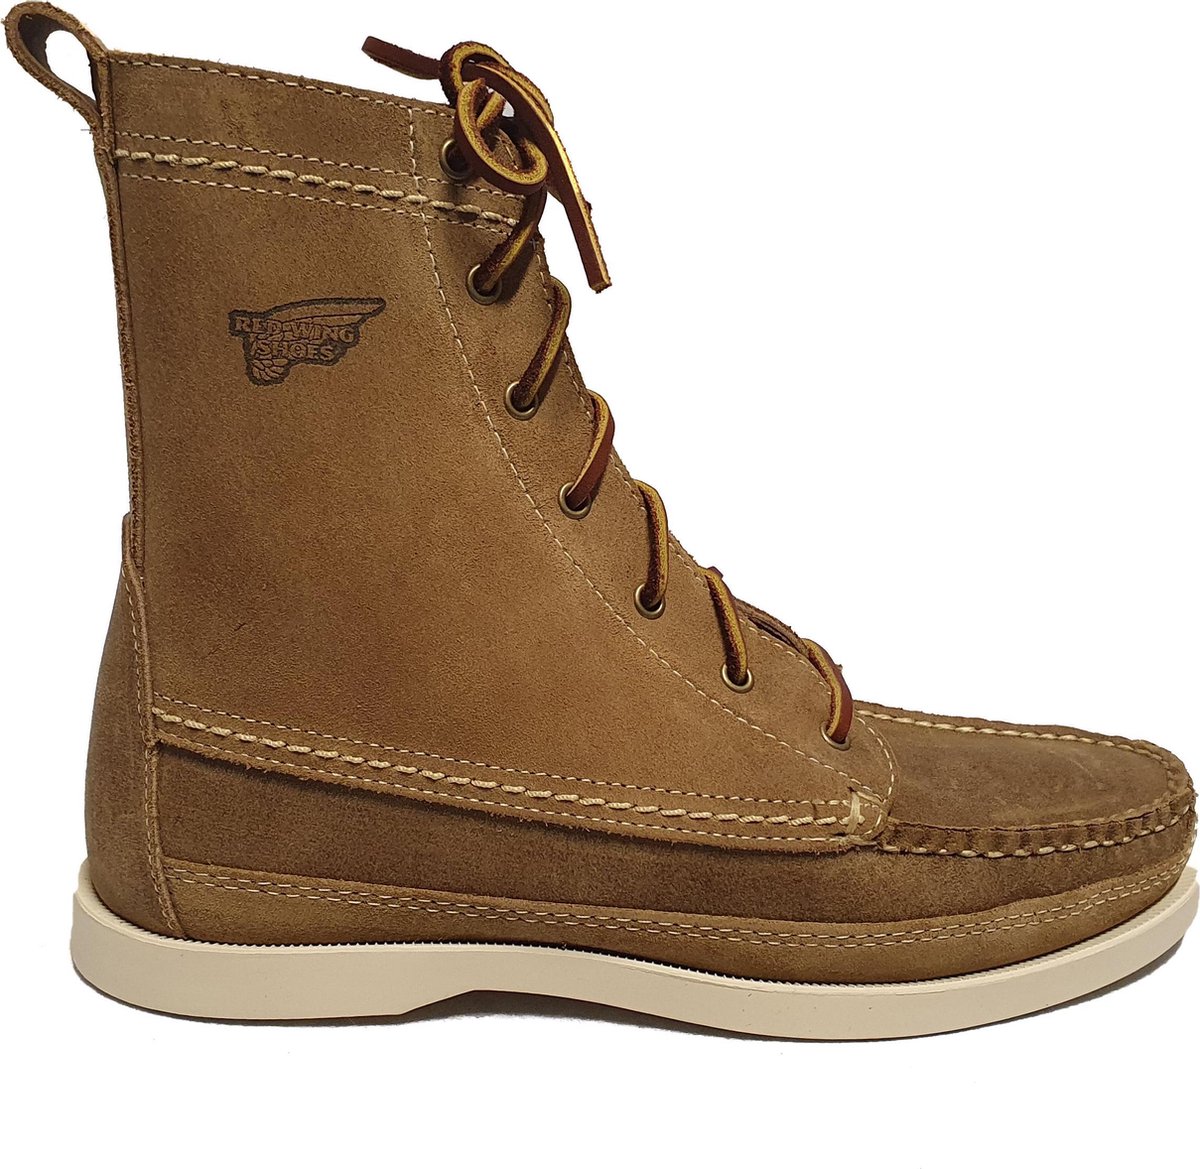 Red Wing Wabasha Boat Boot Suede 07190 Camel EU 44.5